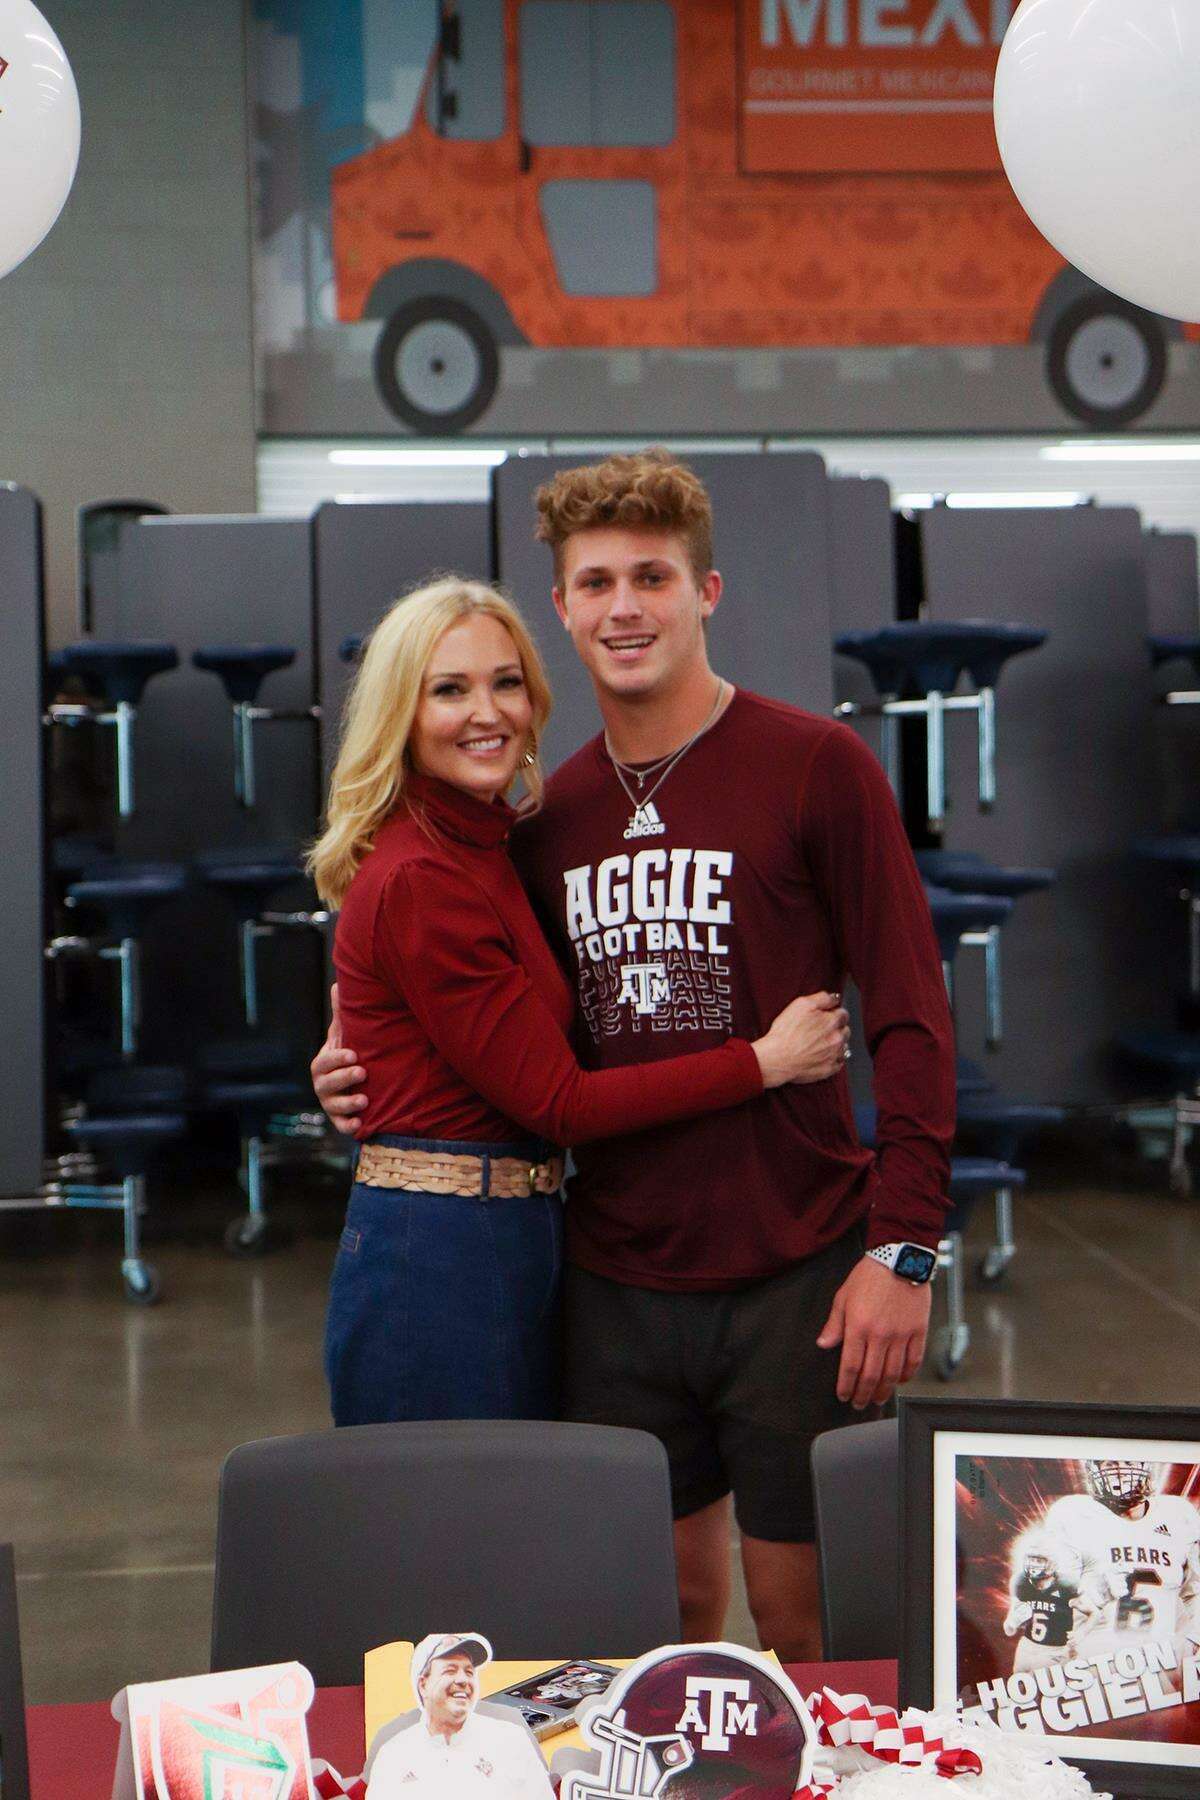 Bridgeland High School senior Andrew Maleski, right, smiles after signing a letter of intent to Texas A&MUniversity on Dec. 15. (Photo by Michelle Padilla, Bridgeland HS)